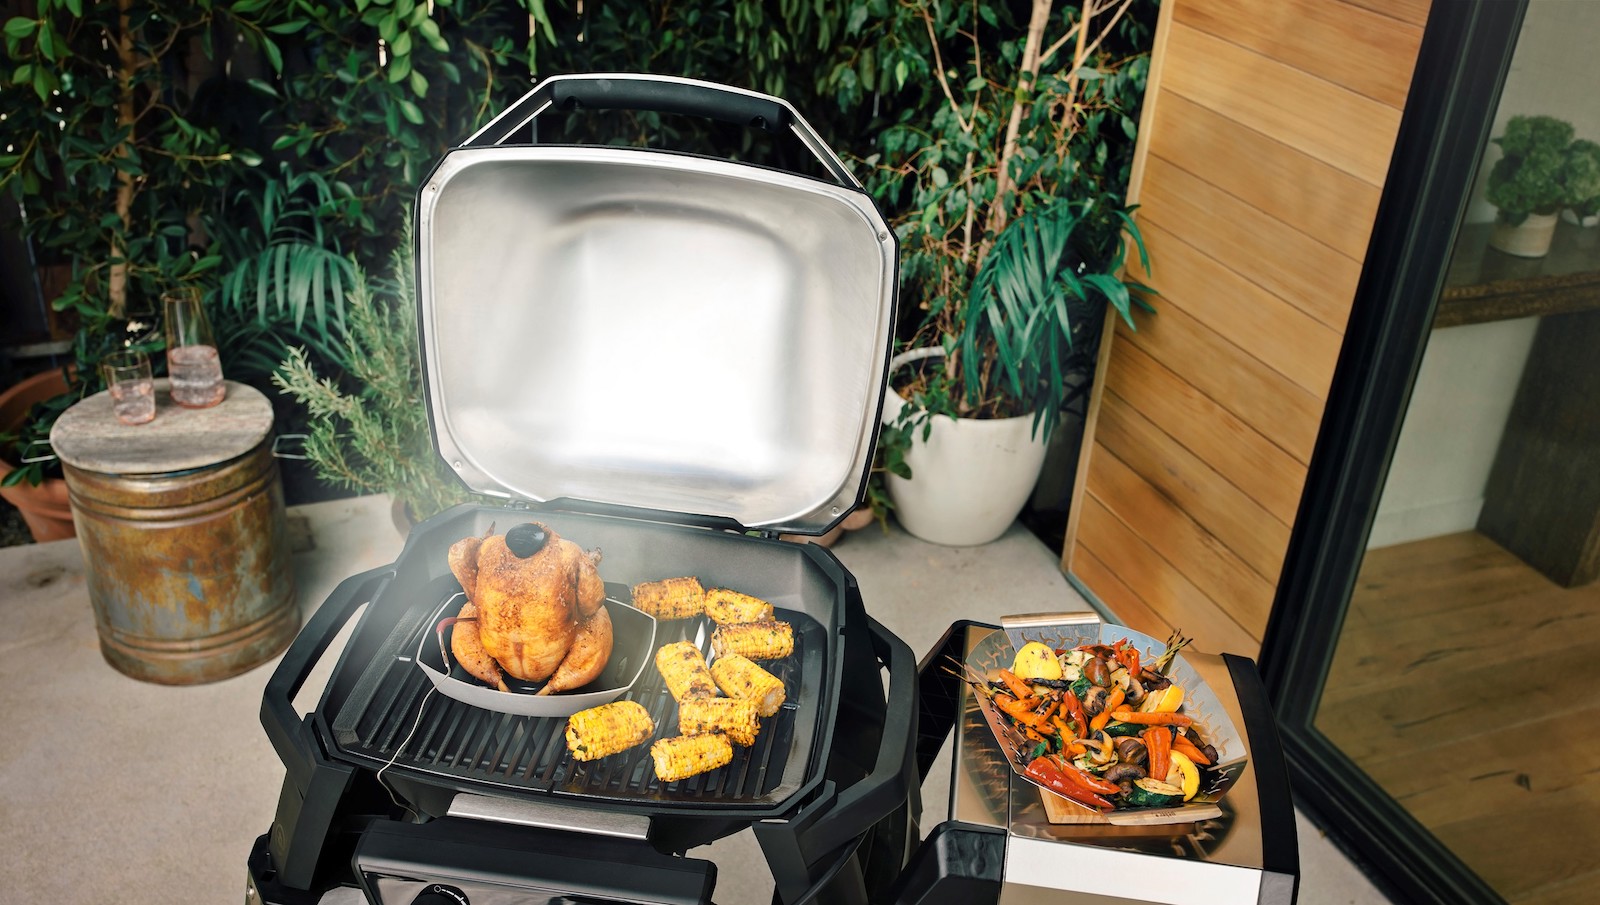 Weber-Stephen Products Japan releases Japan's first 'smart grill